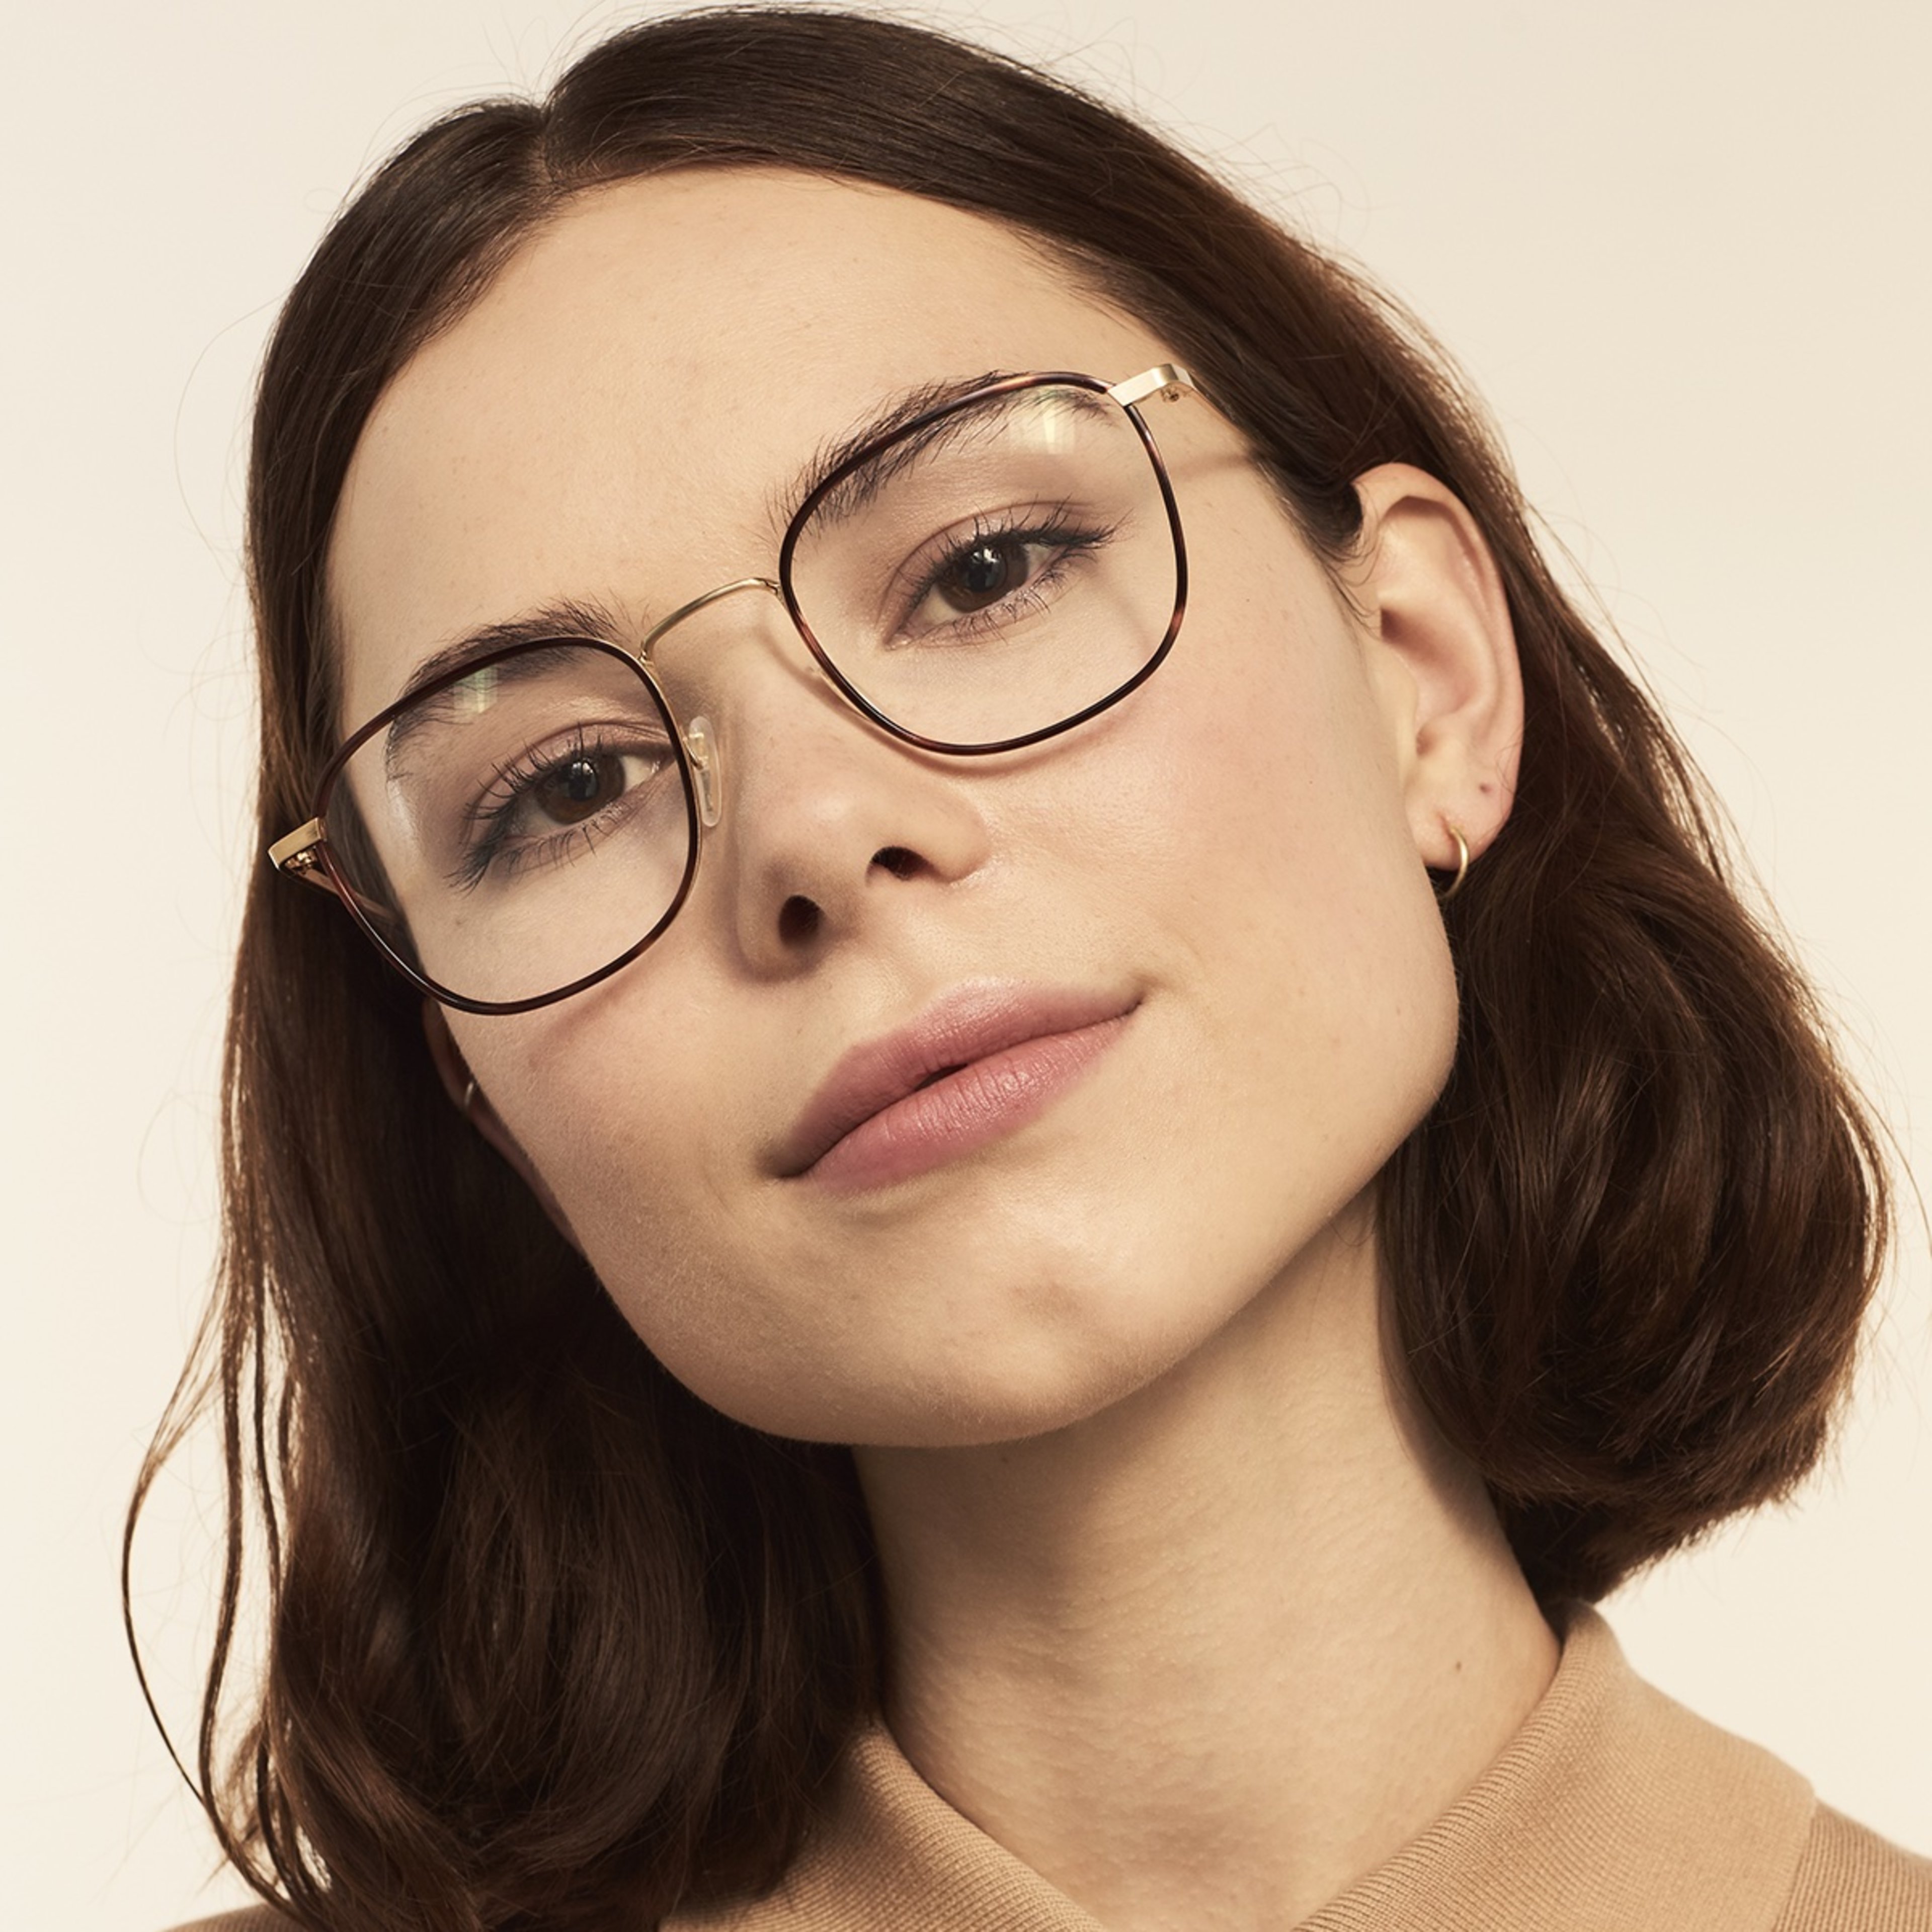 Ace & Tate Glasses | Square Metal in 